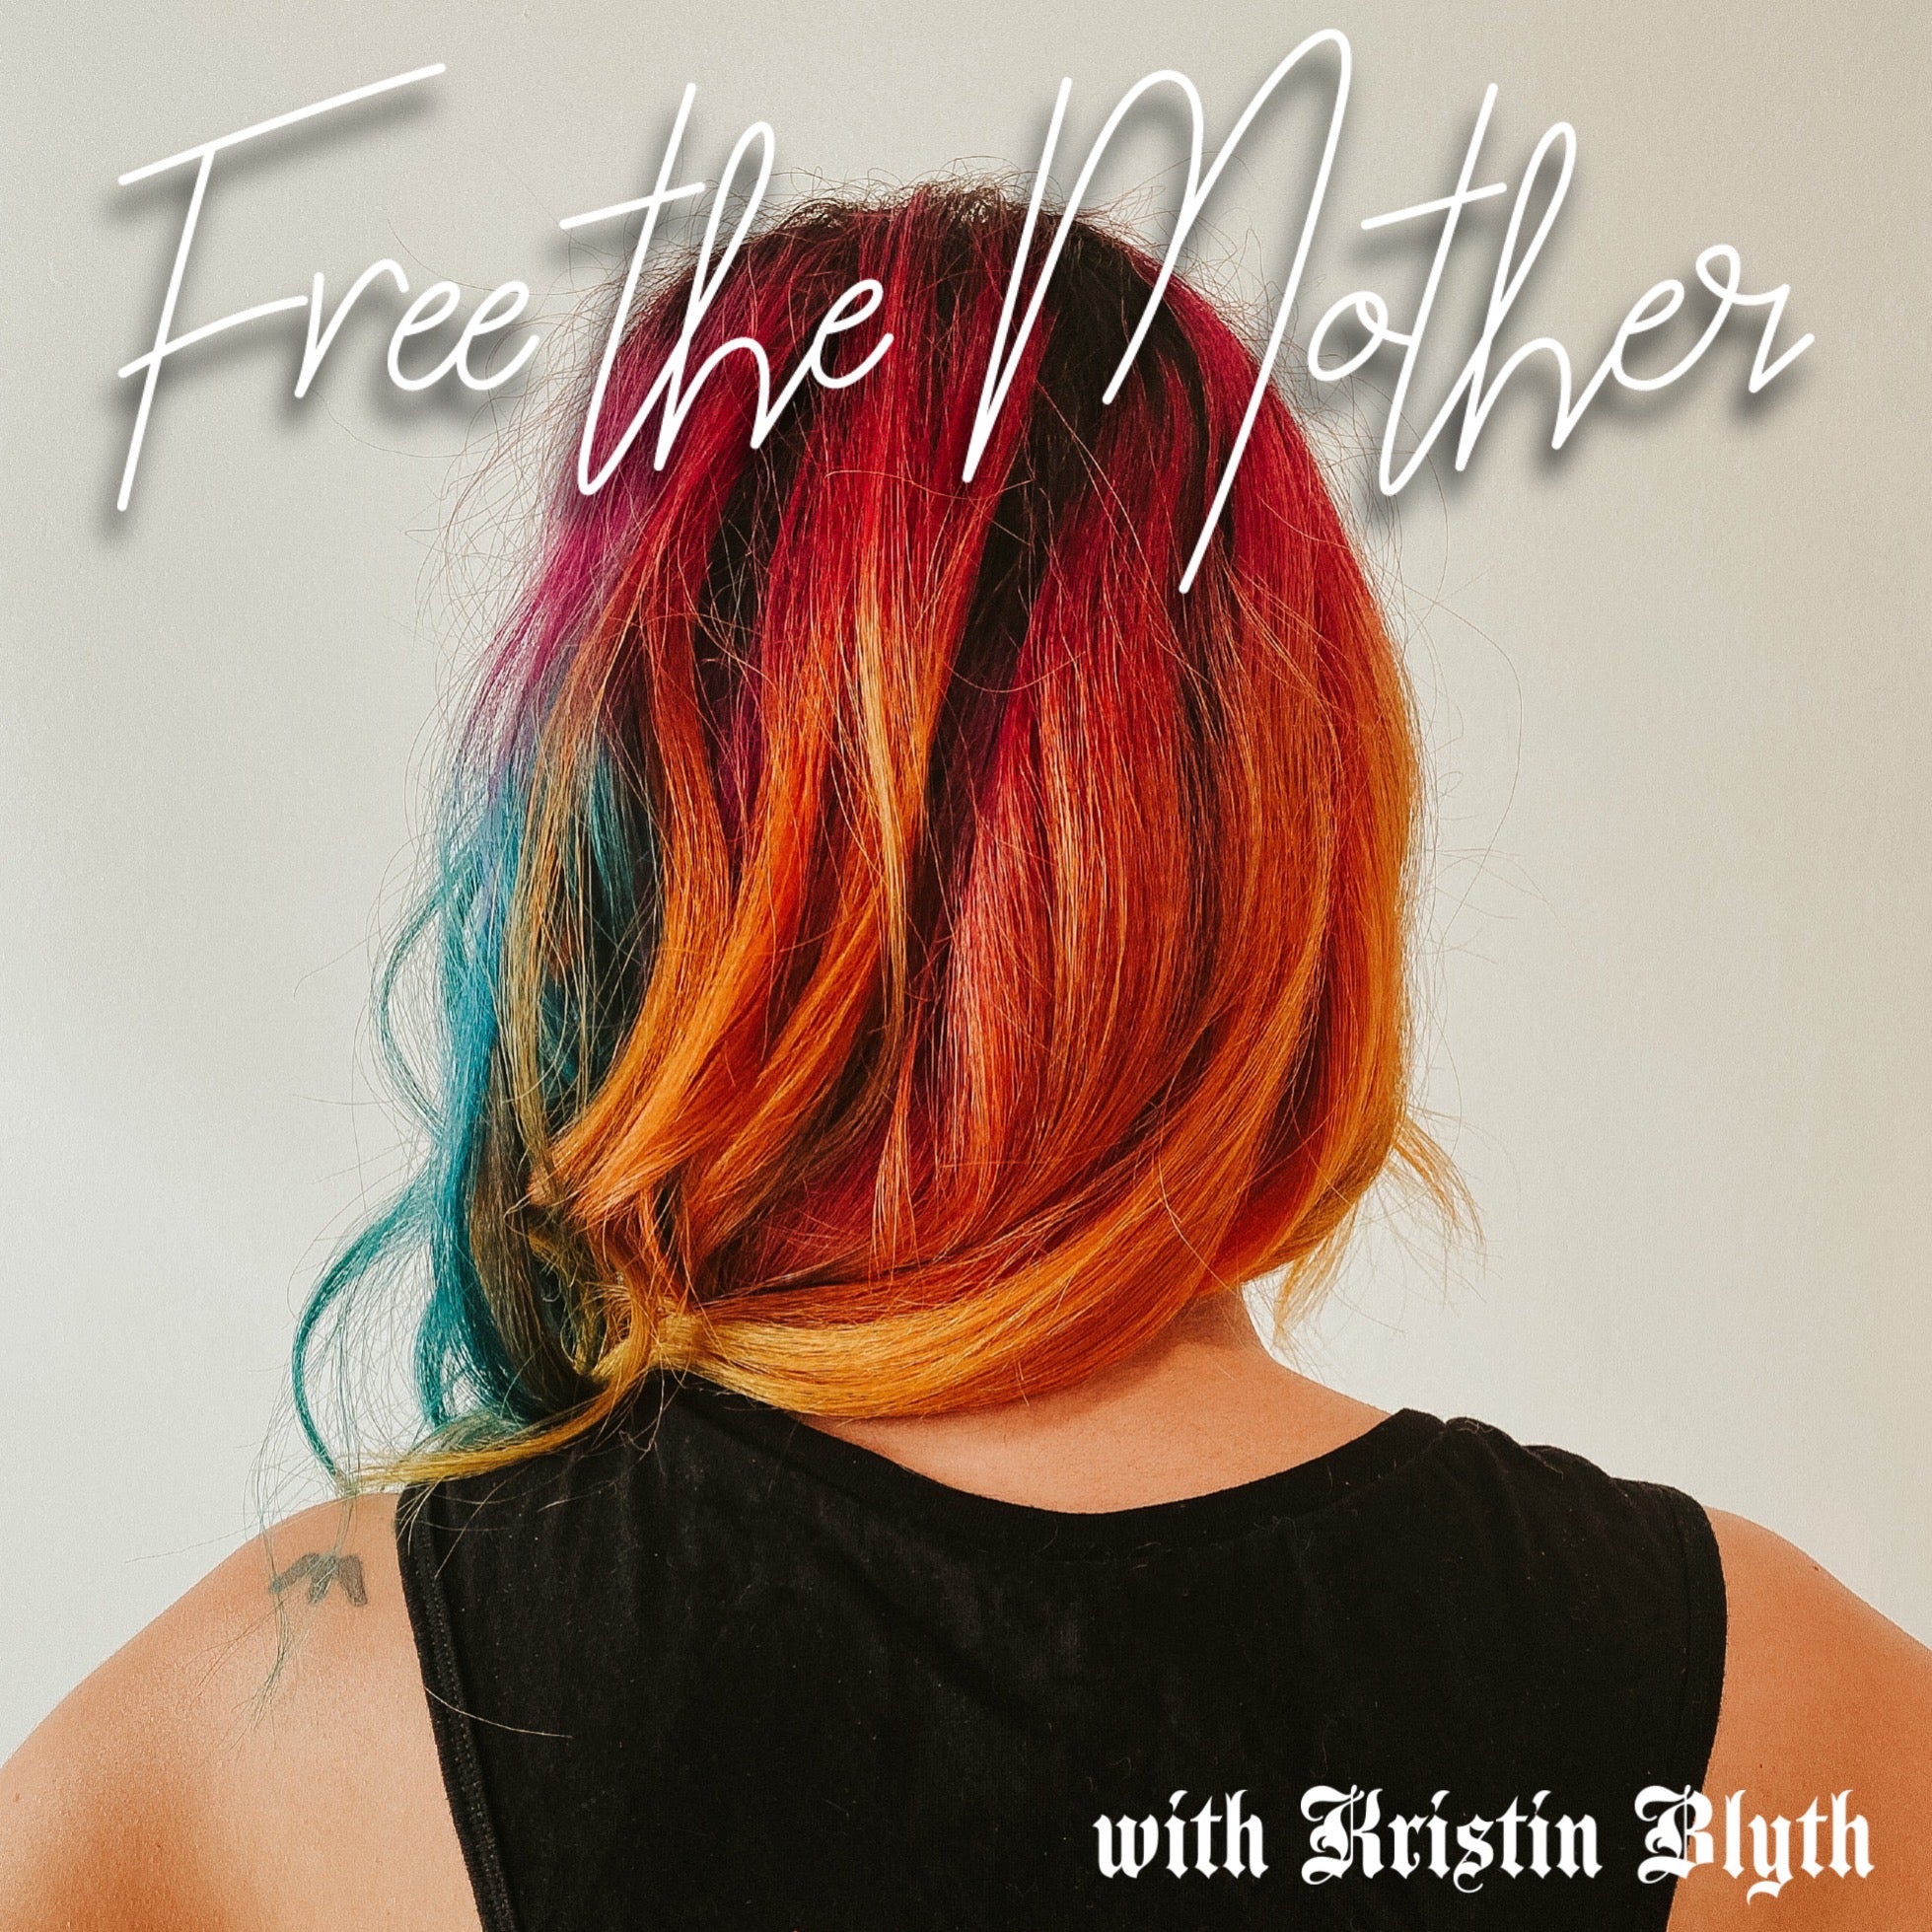 Breaking News: Free the Mother Has a Podcast!